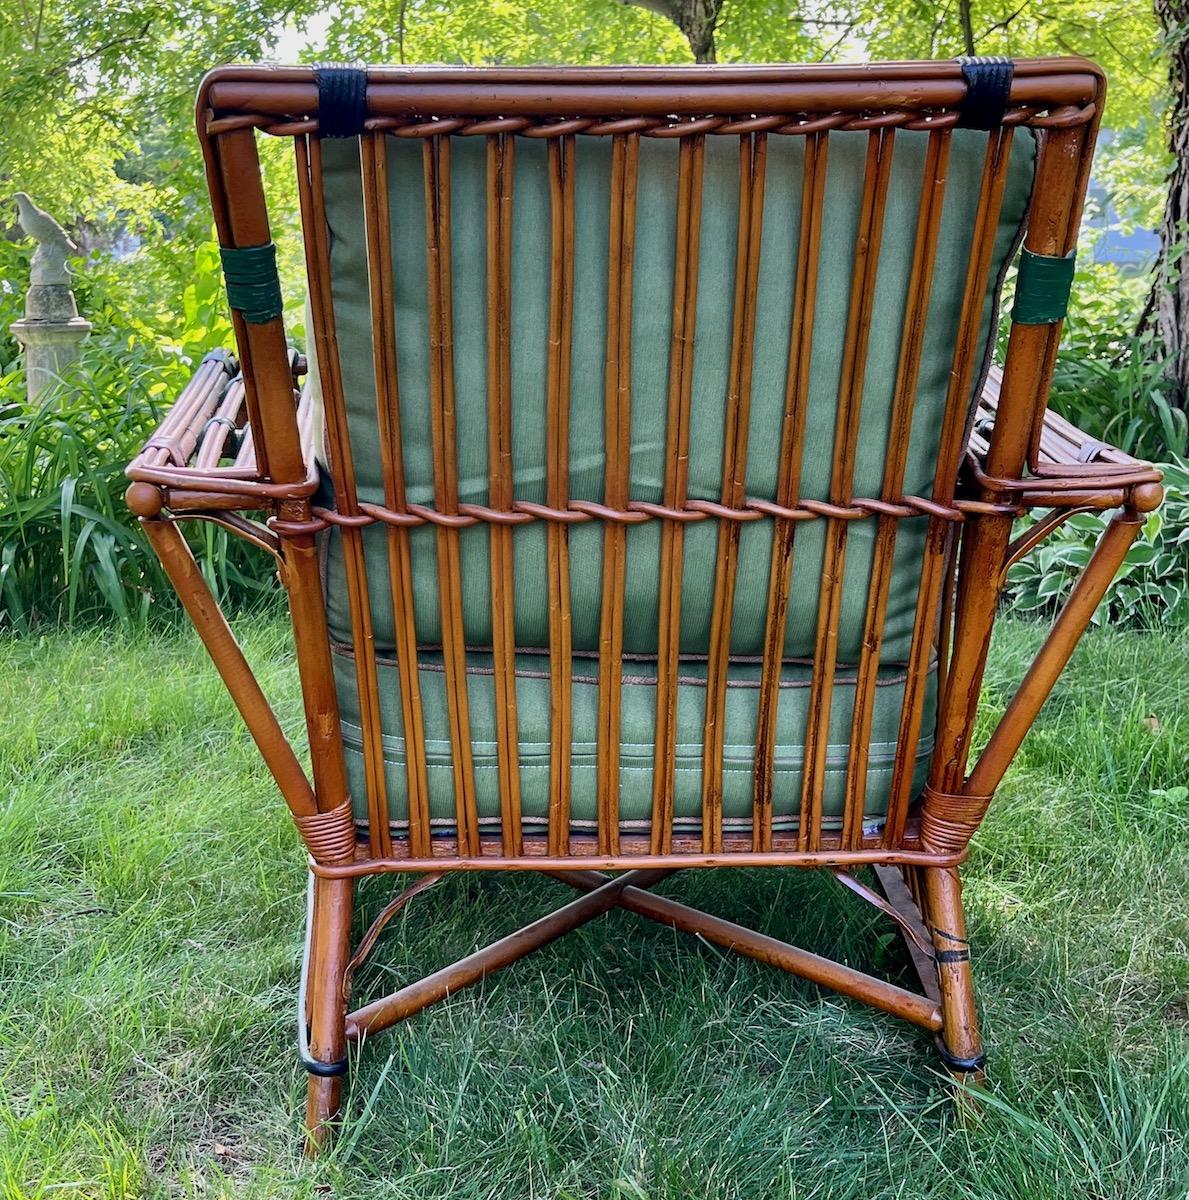 Antique Rattan / Stick Wicker Arm Chair in Natural Finish with Colored Trim In Good Condition For Sale In Nashua, NH